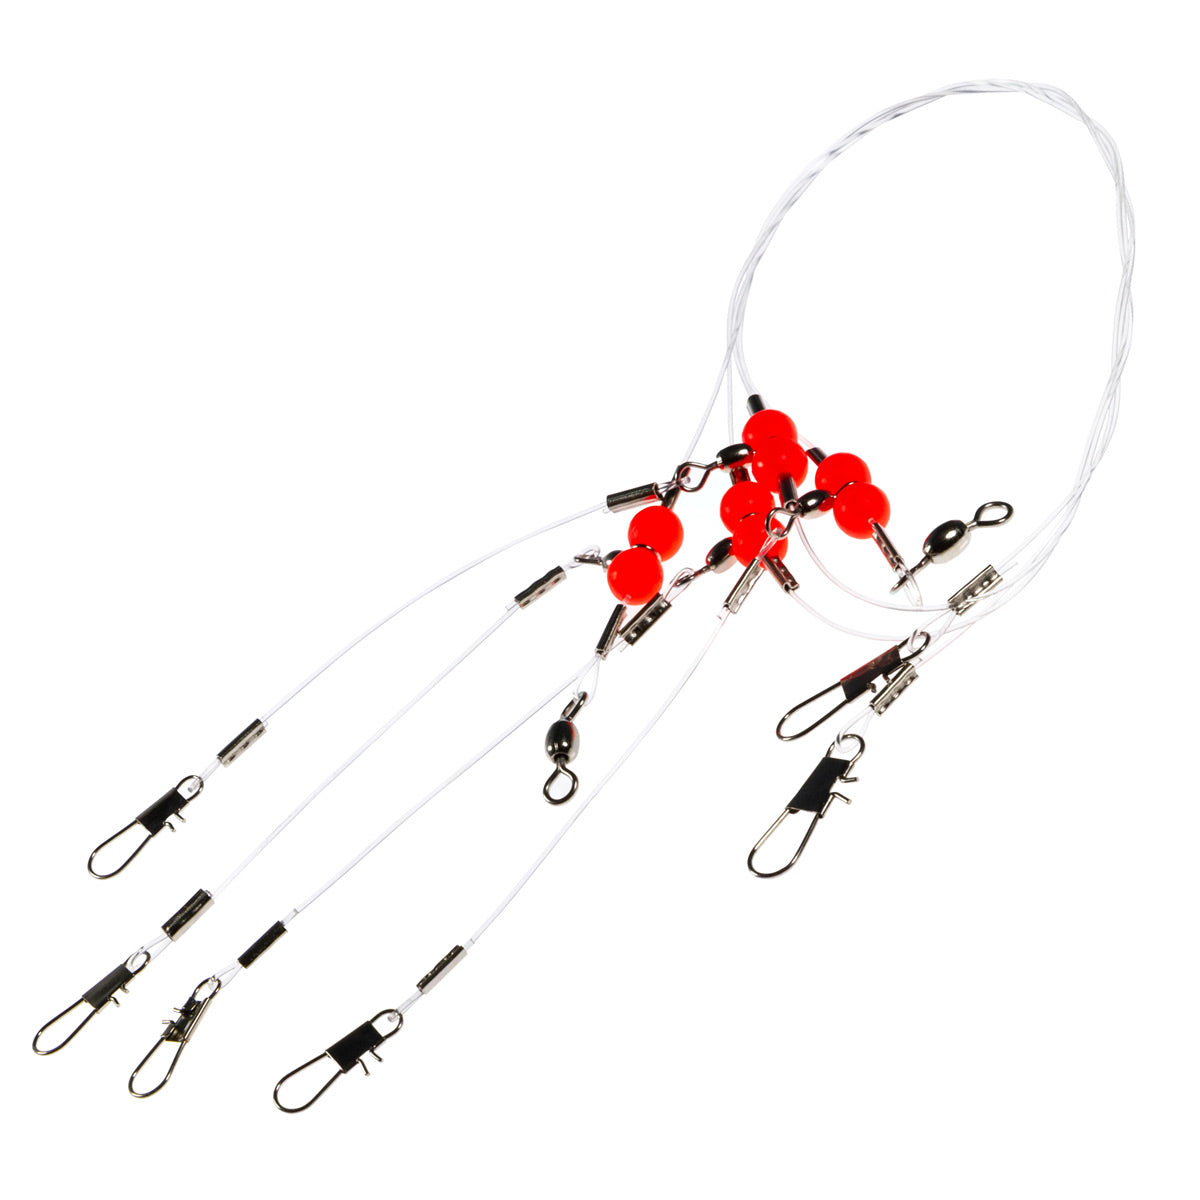 Stellar Fishing Mono Double Drop Leader Rig (12 Pack), Nylon Fishing Rig  Lure Riggings with Snap Swivel, Beads and Fishing Wire 